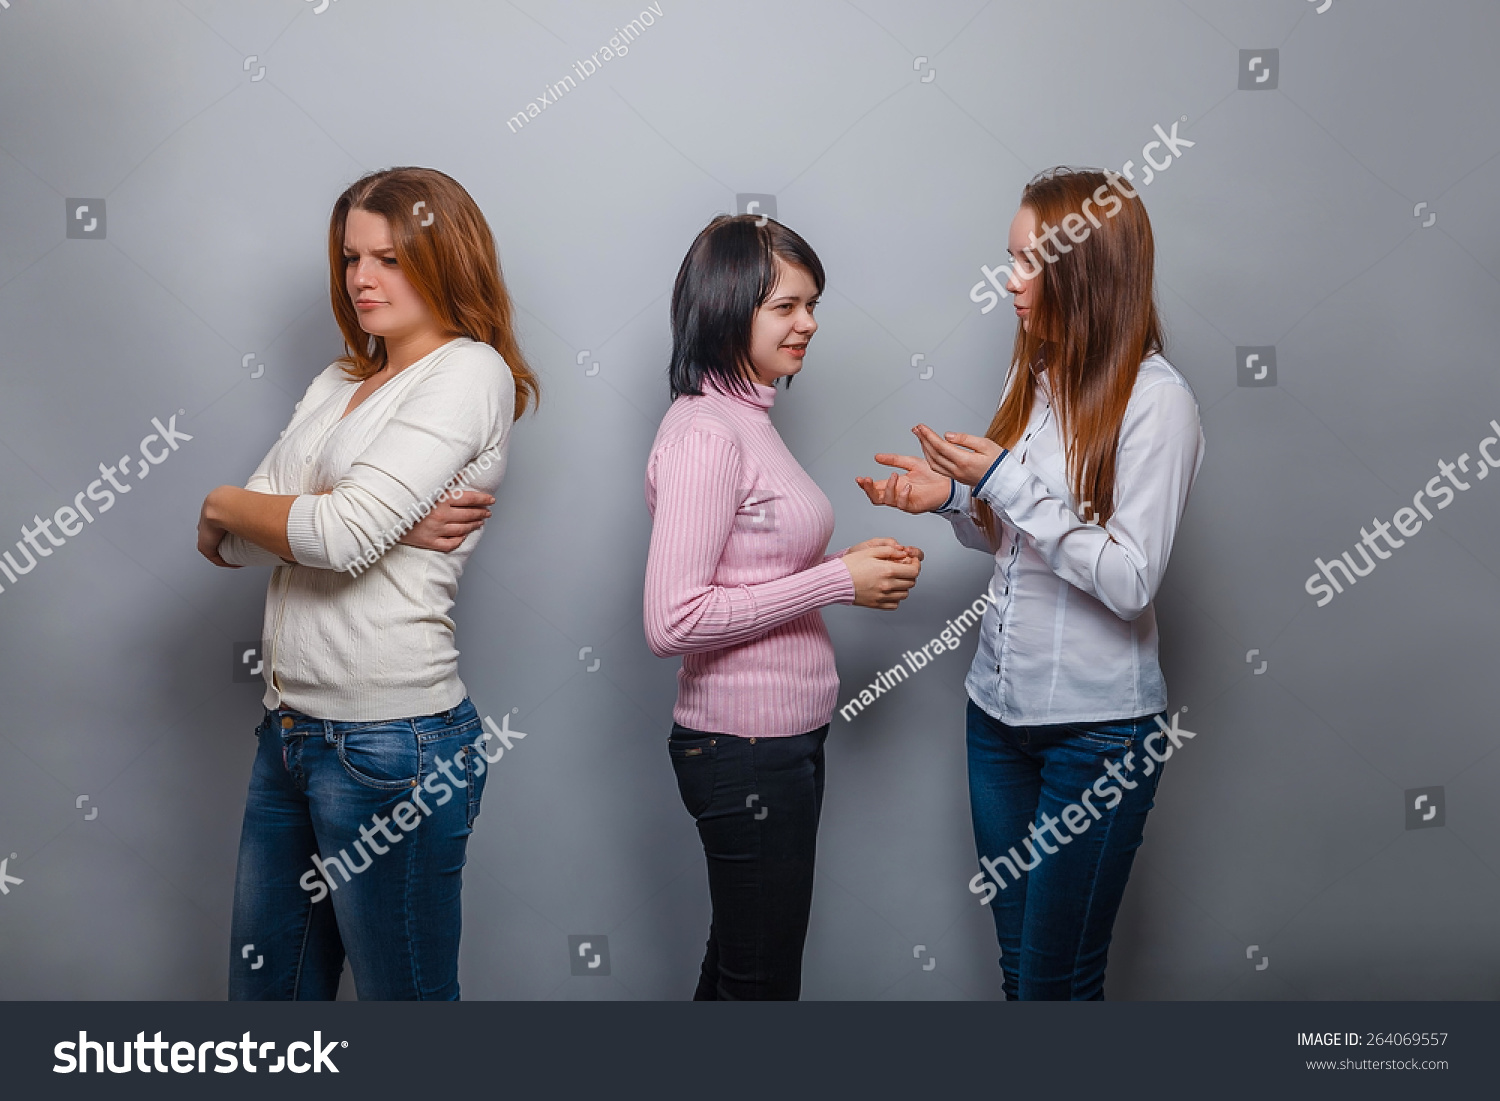 Two girls talking  blonde  European appearance and ignore the third girl on a gray background, resentment, sadness conflict friend #264069557